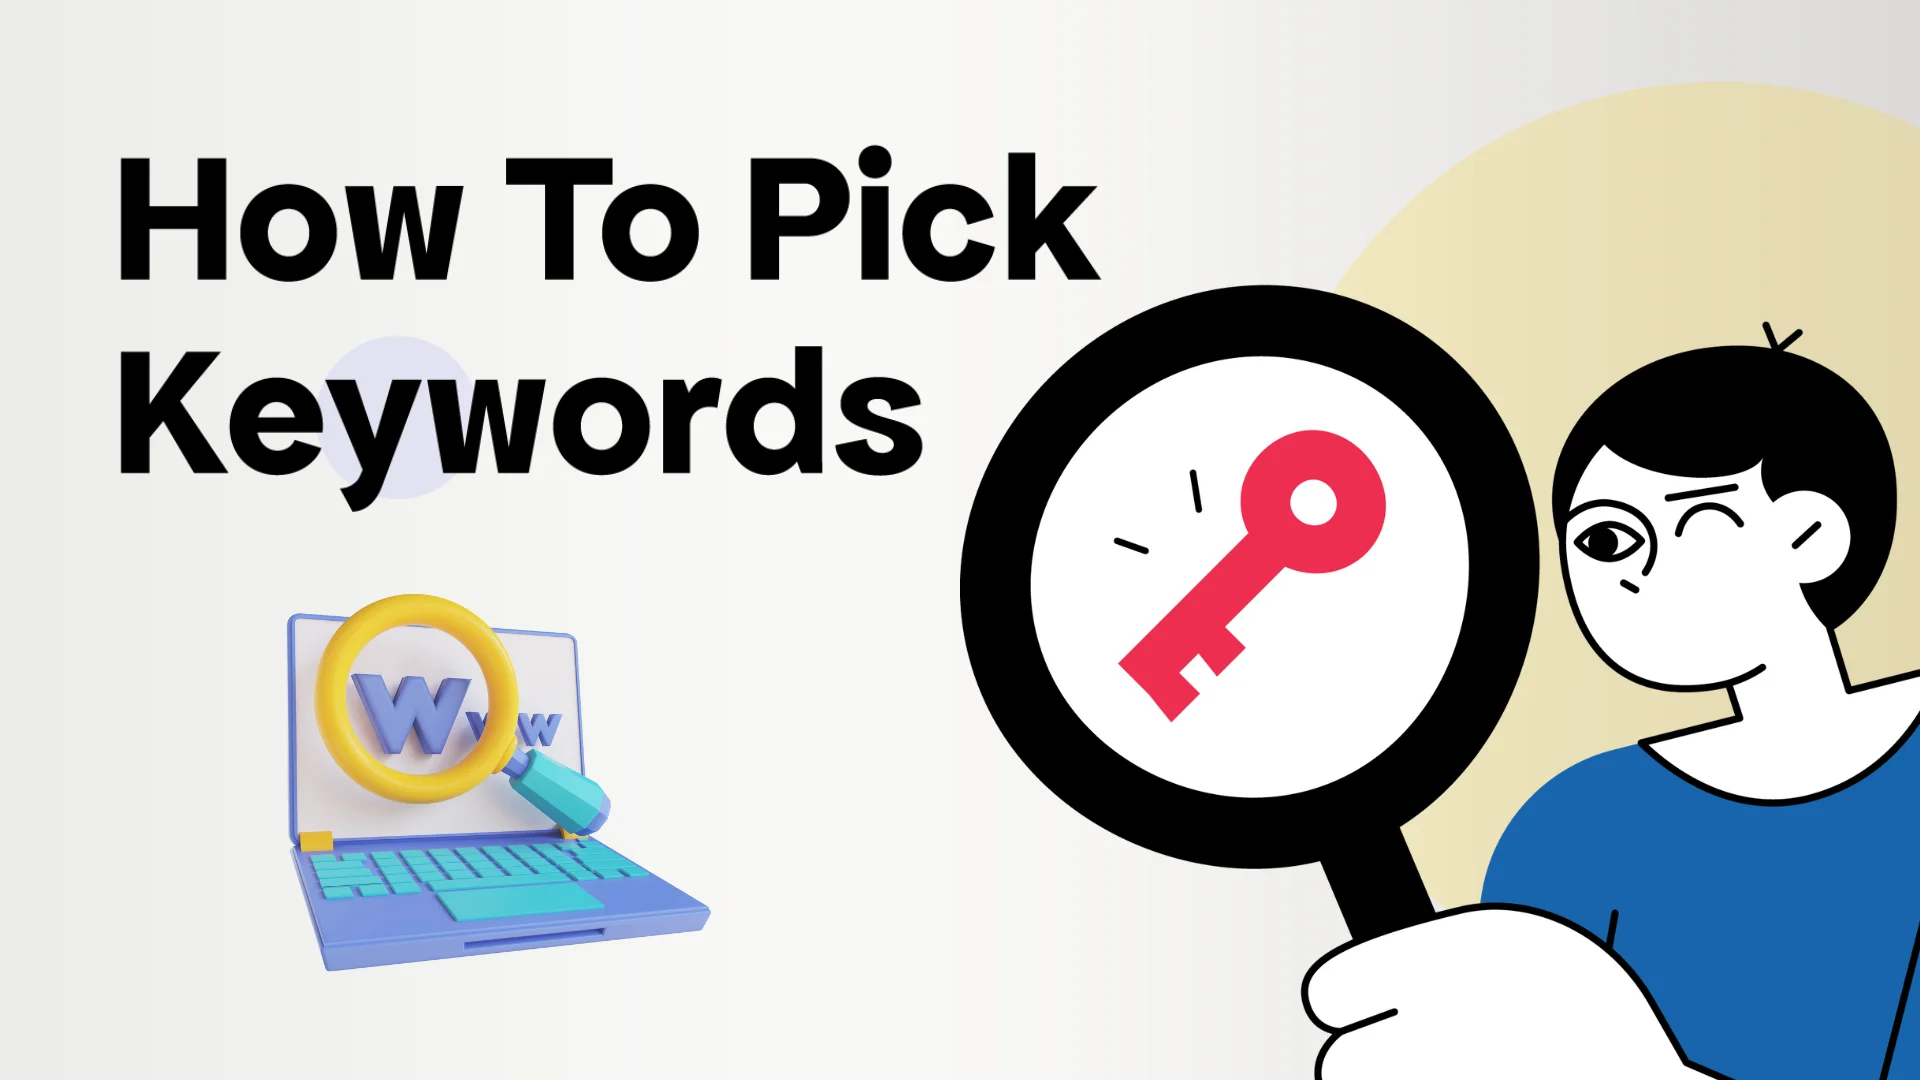 How to pick keywords featured Image